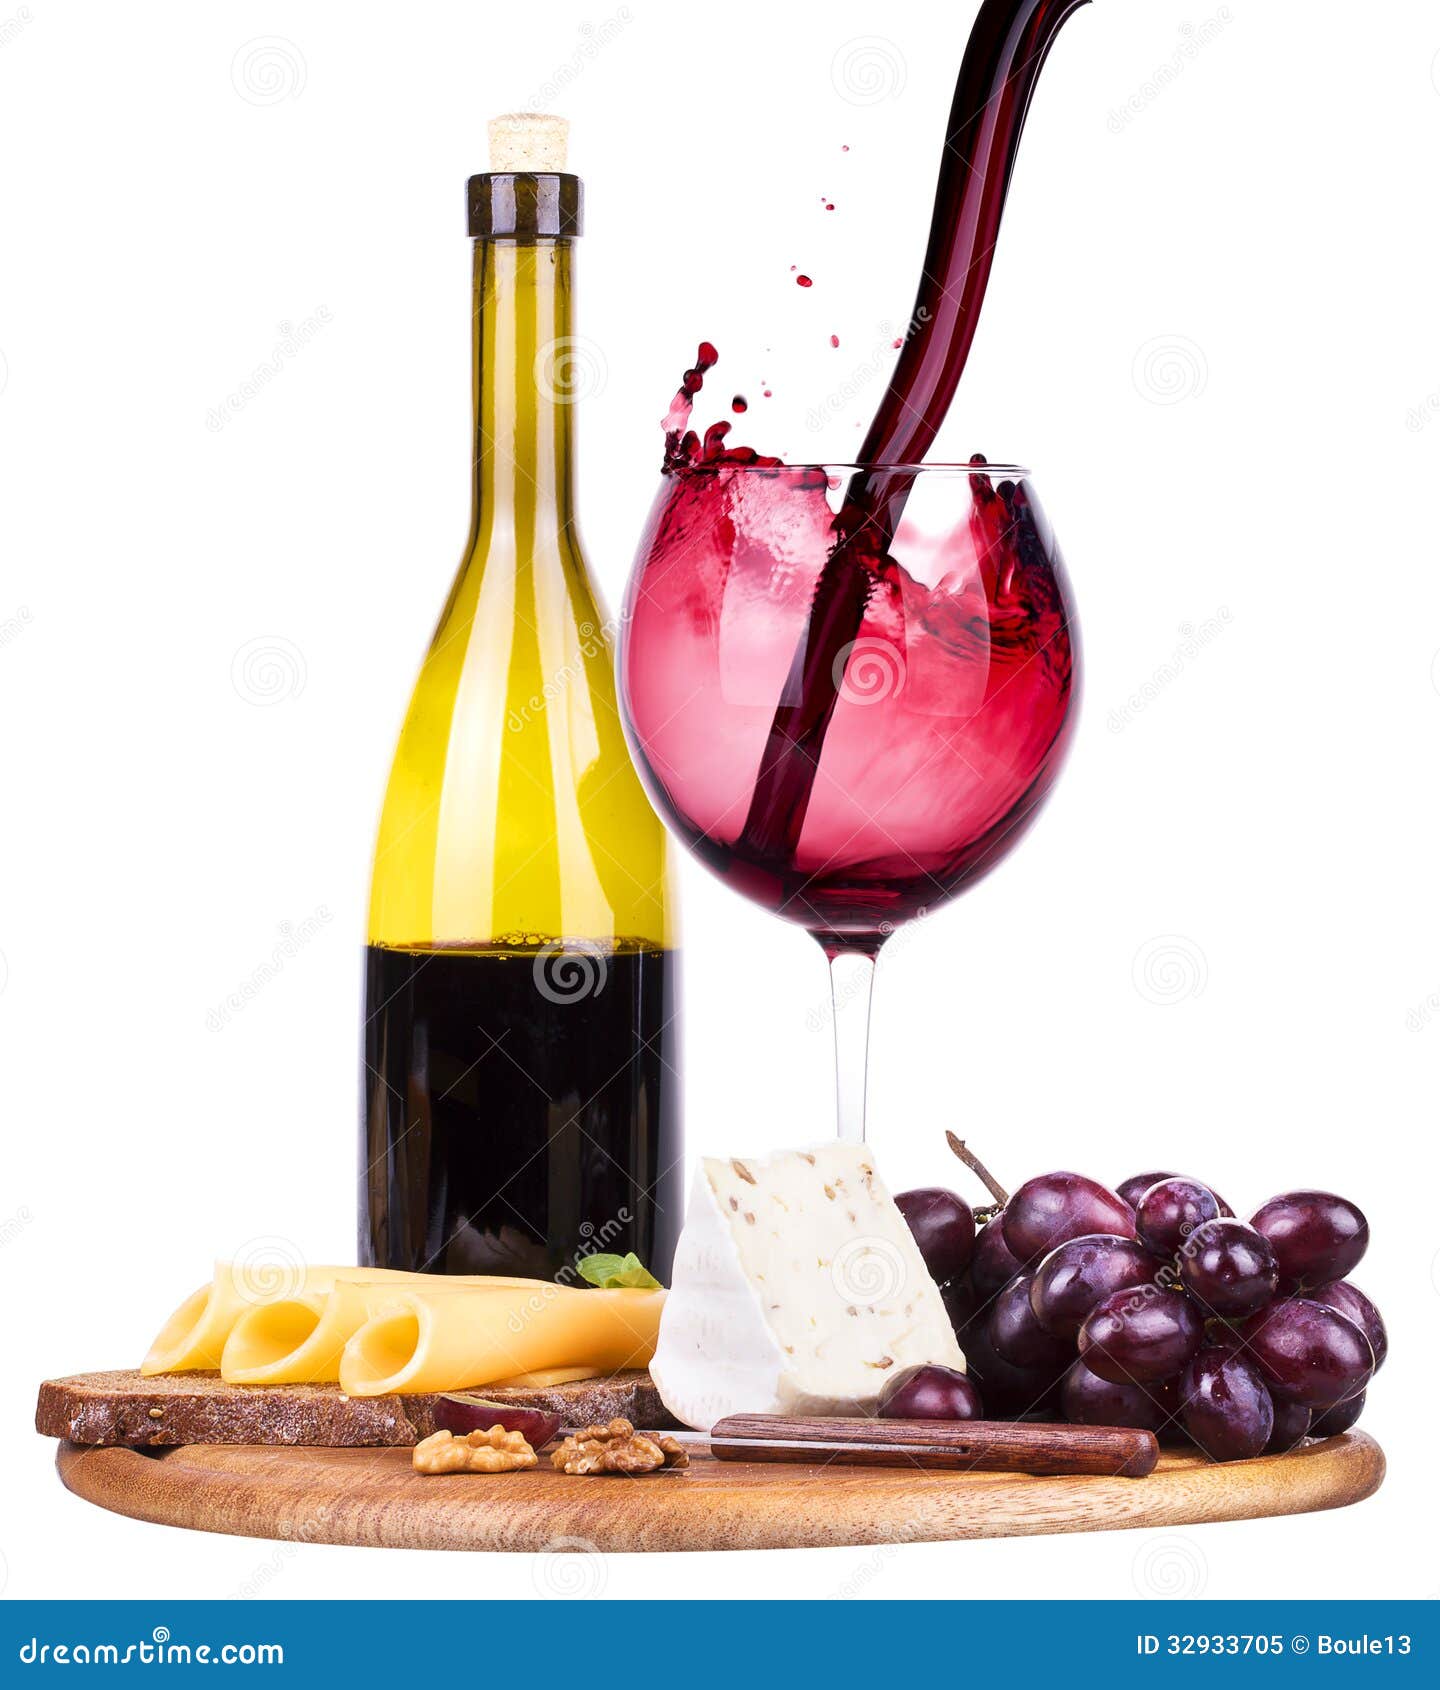 Picnic Background With Wine And Food Royalty Free Stock ...